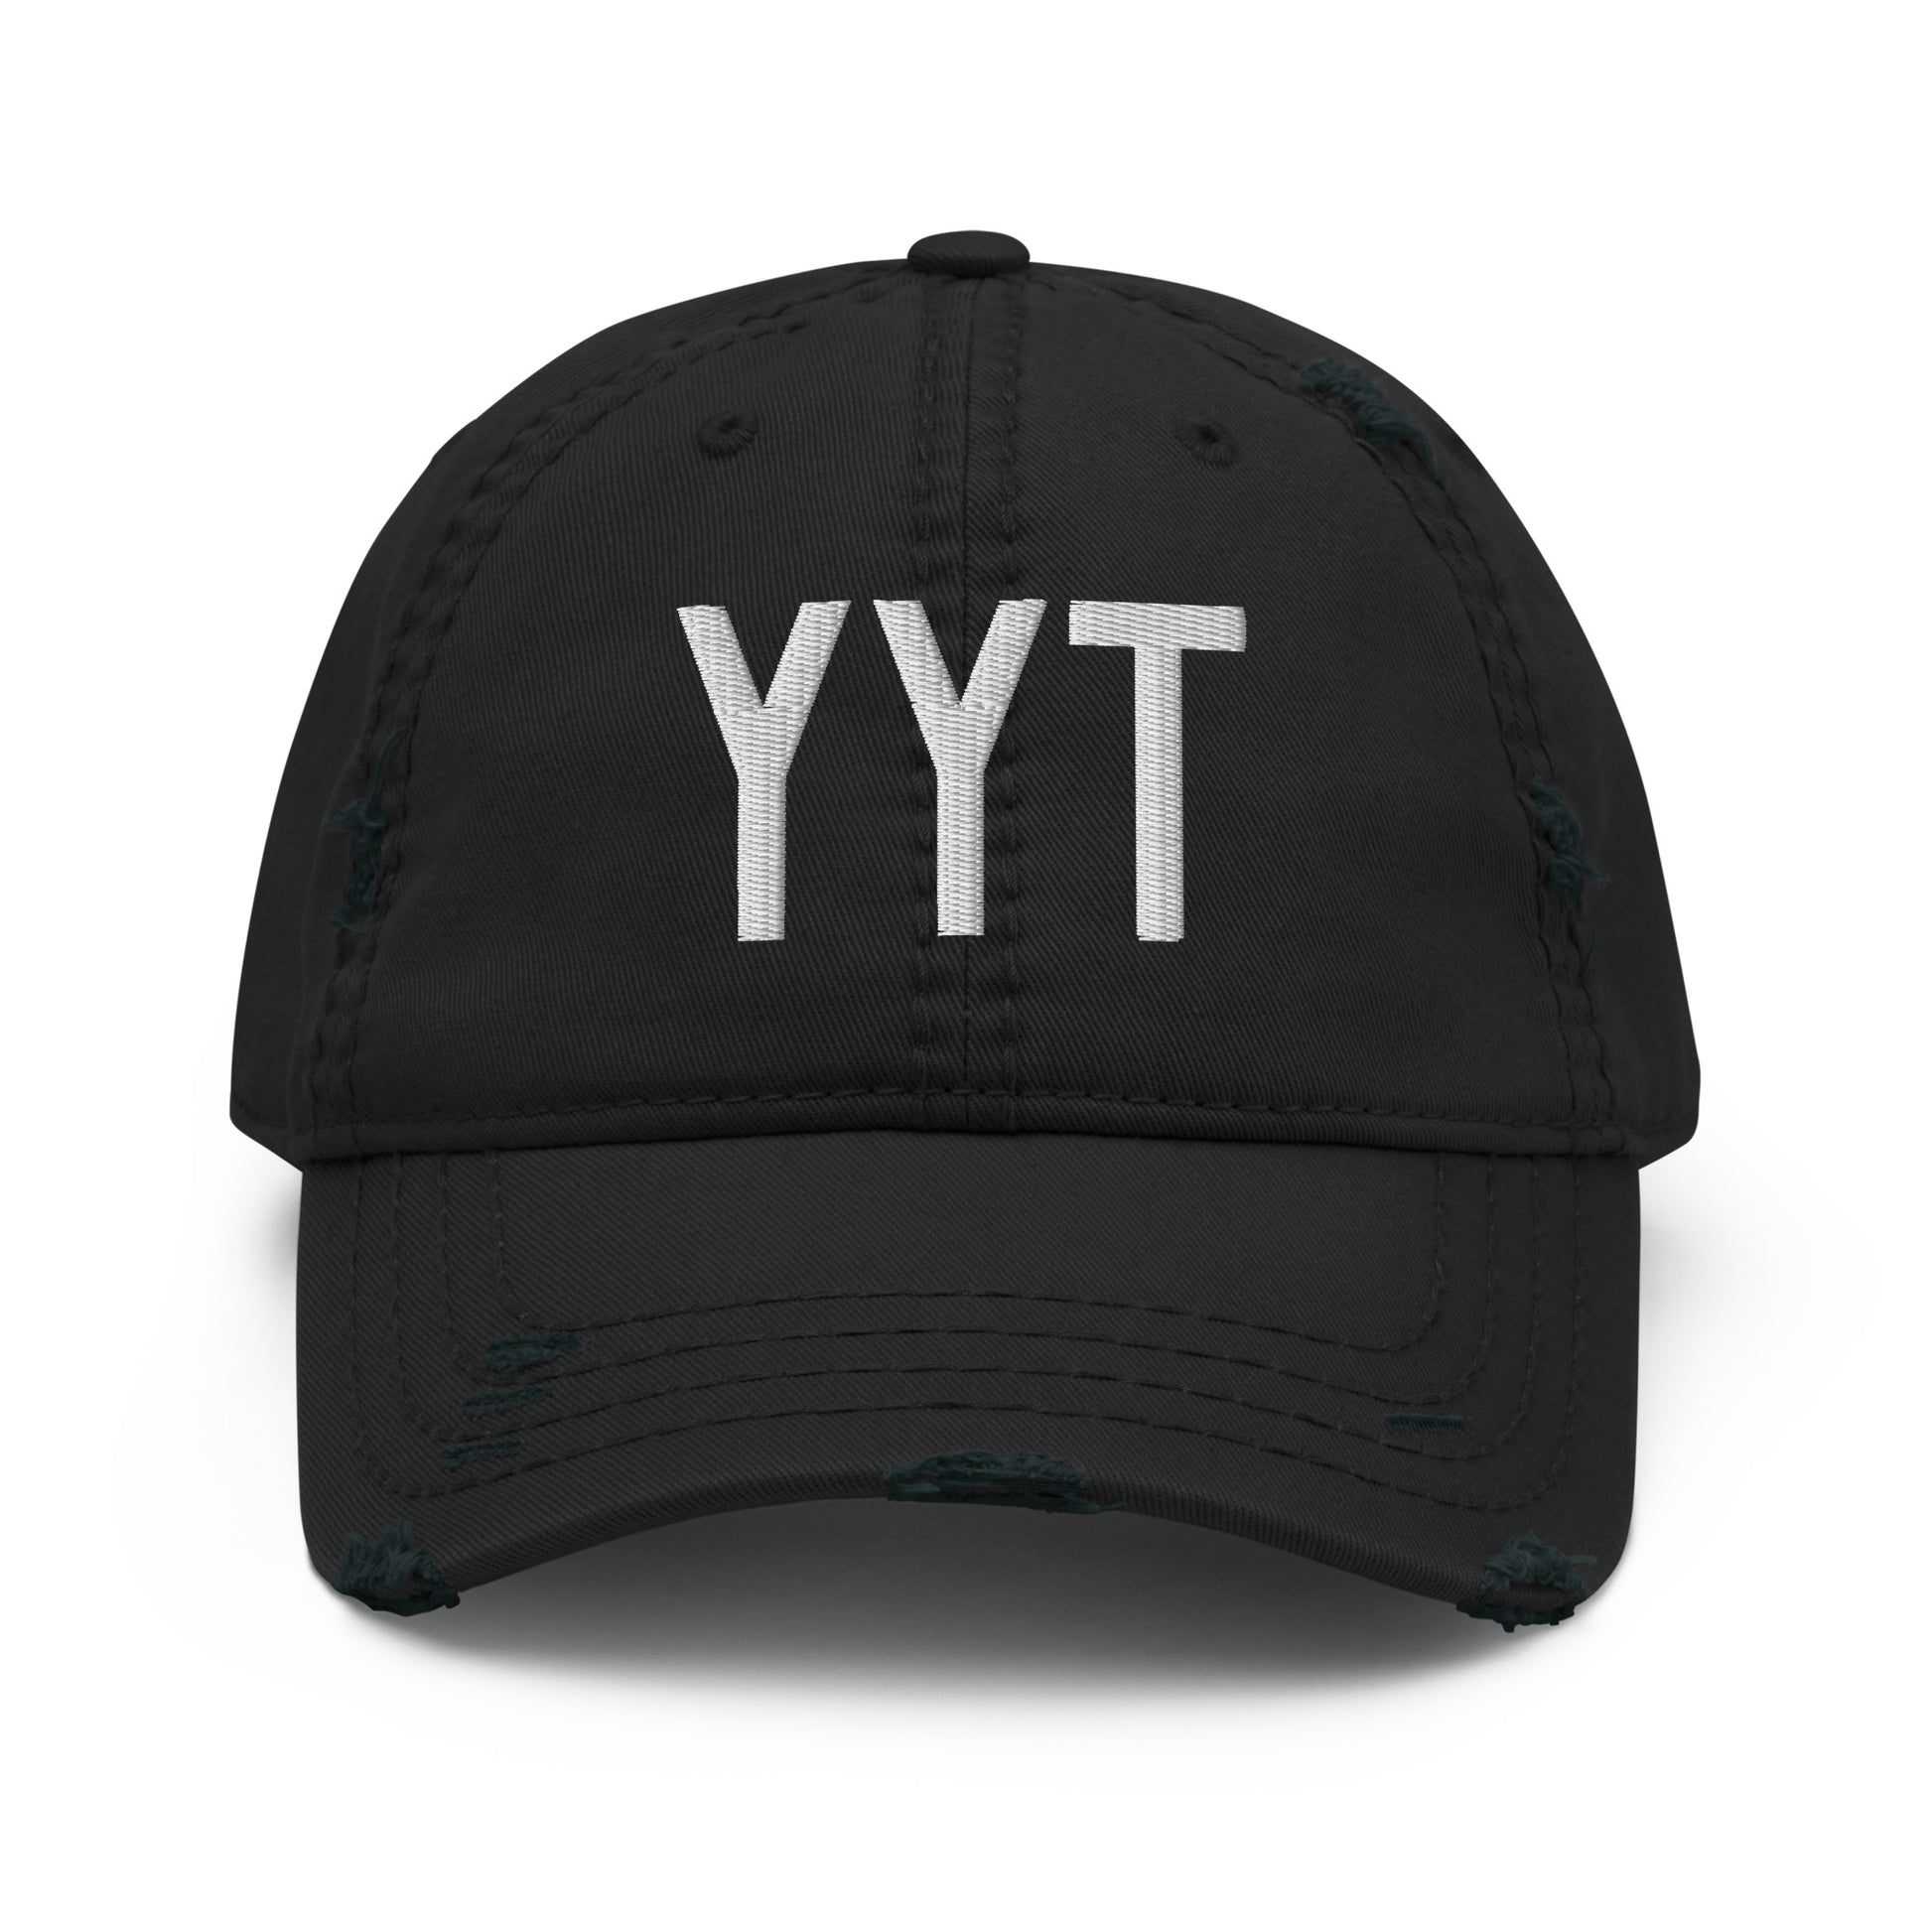 Airport Code Distressed Hat - White • YYT St. John's • YHM Designs - Image 10